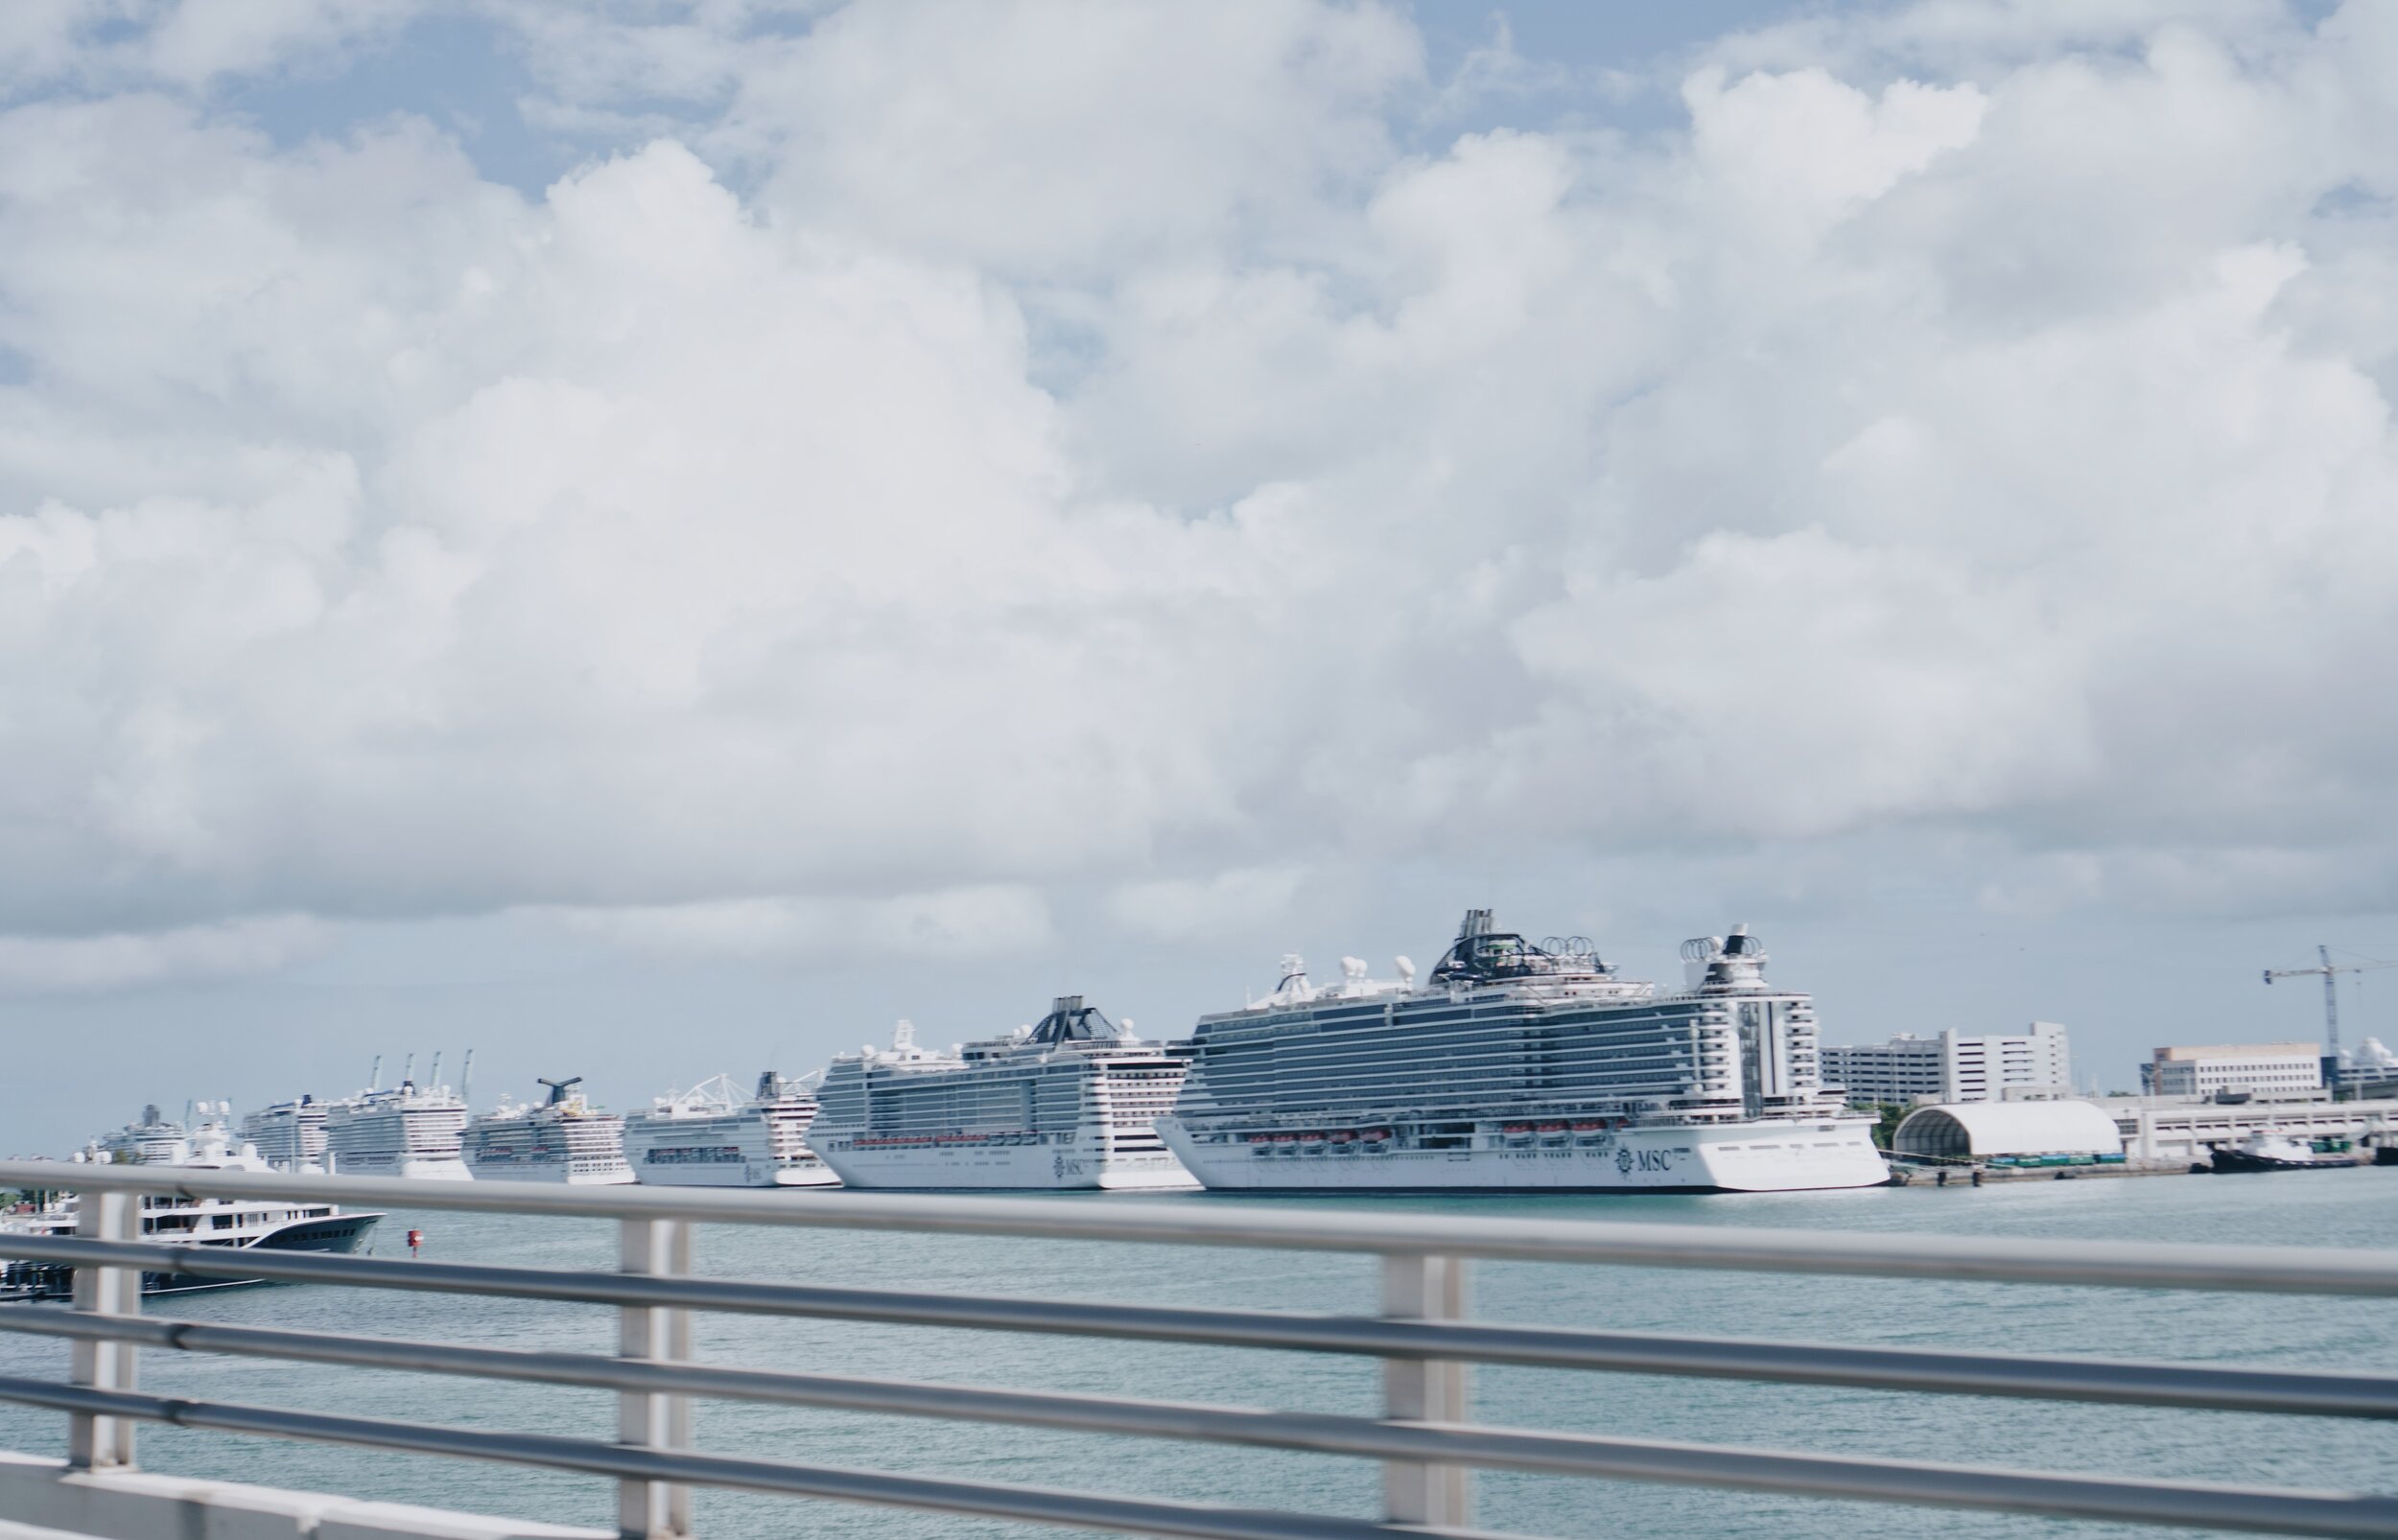 Cruise ships parked in front of Port of Miami